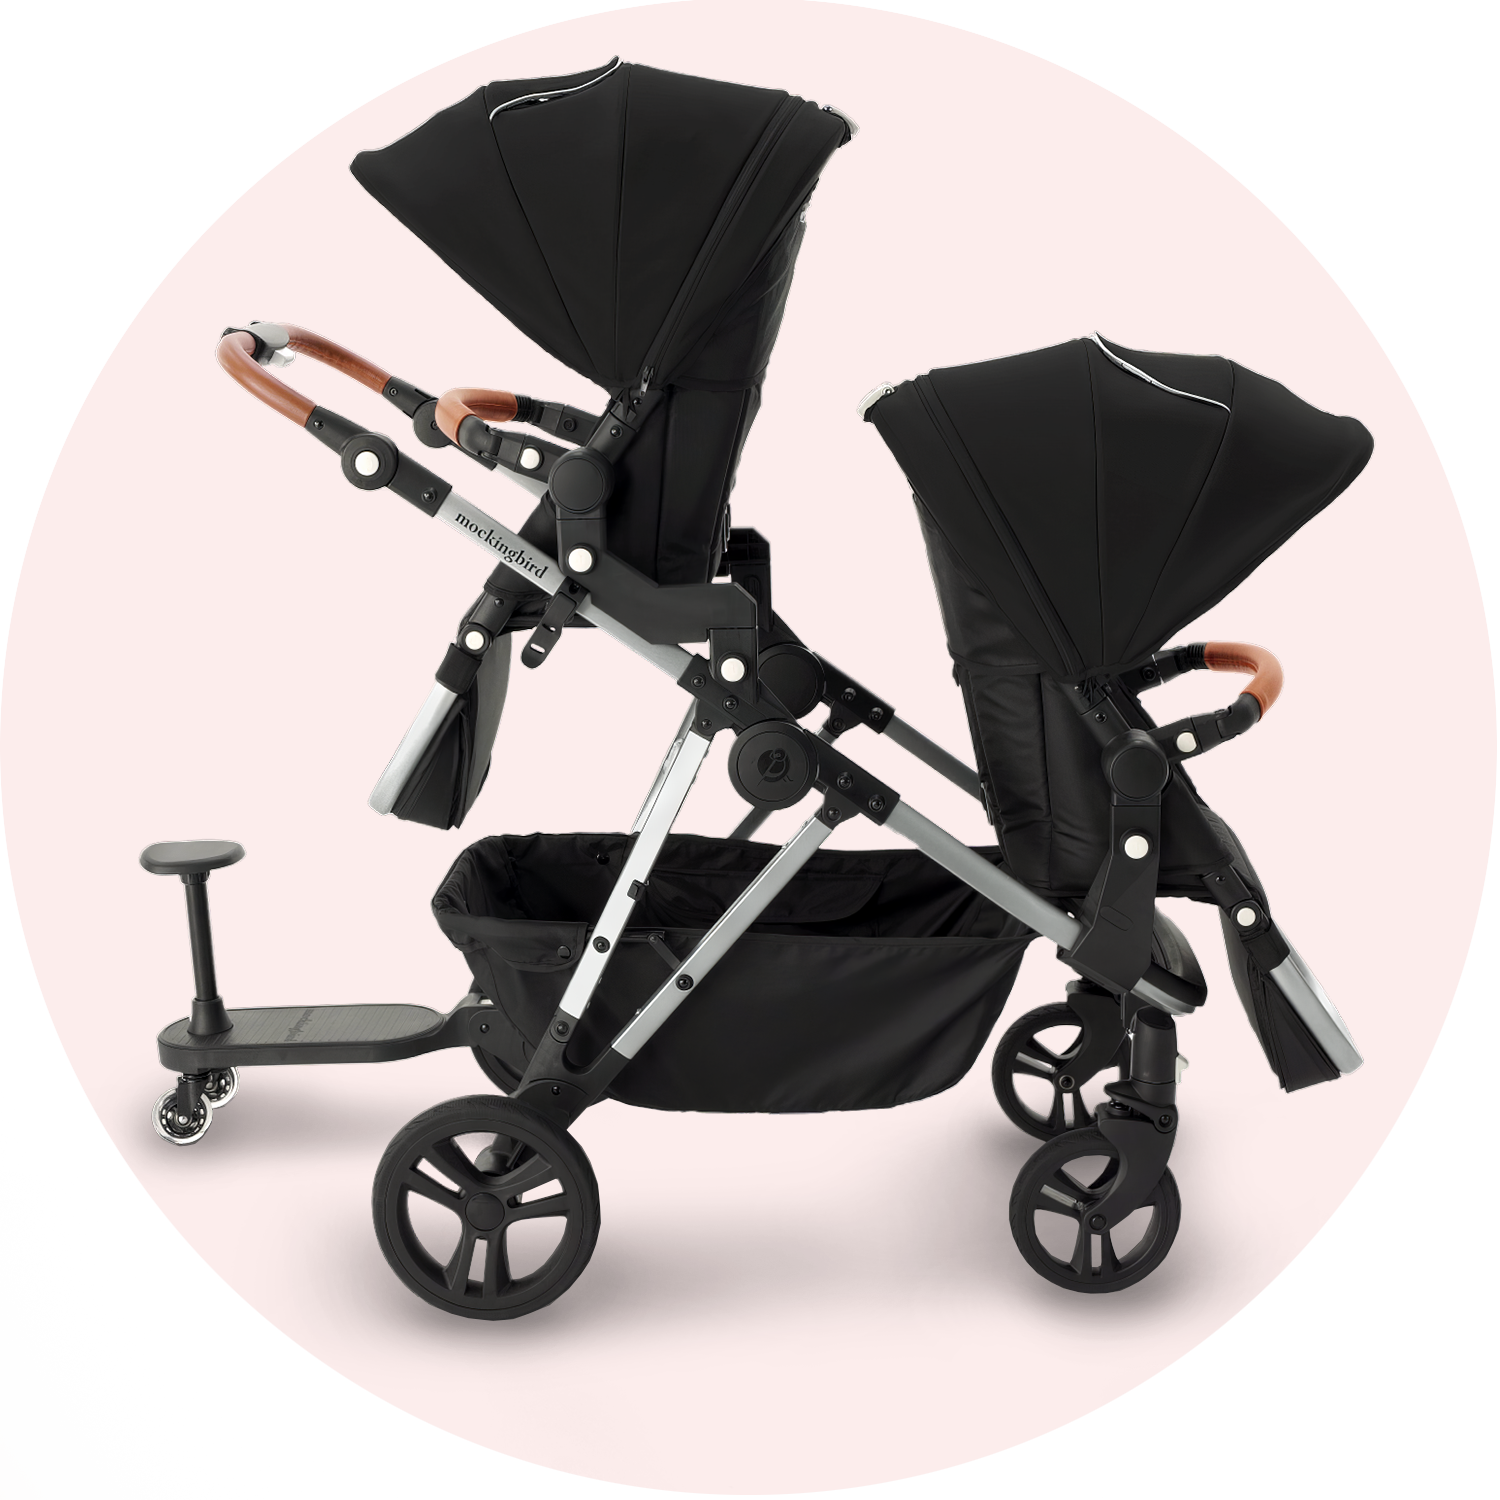 Double stroller with adjustable sunshades and a rear-mounted riding board, set against a soft pink background.